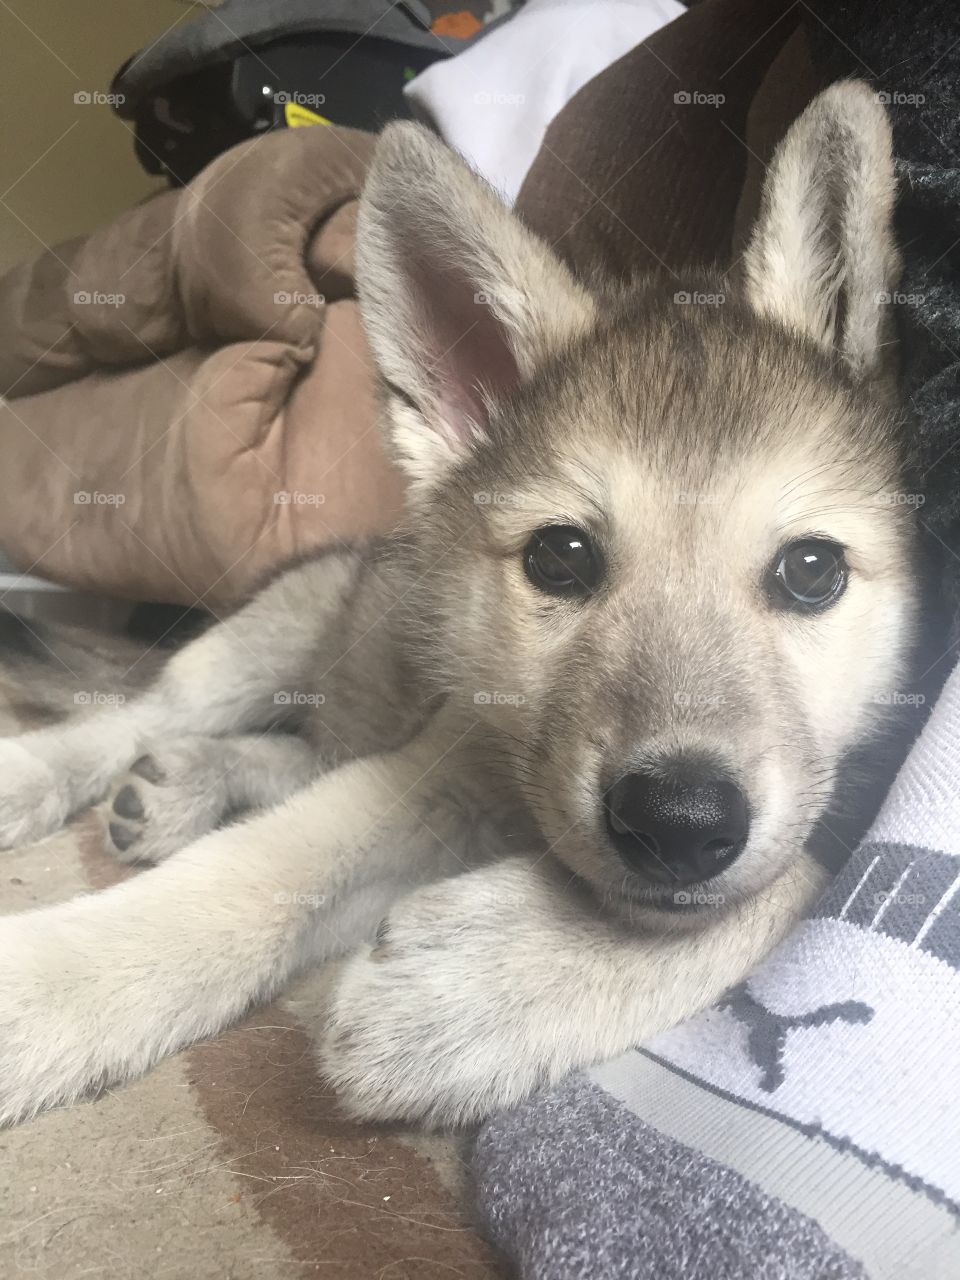 Keeva our wolf pup is almost 2 months old!! Growing up so fast!!